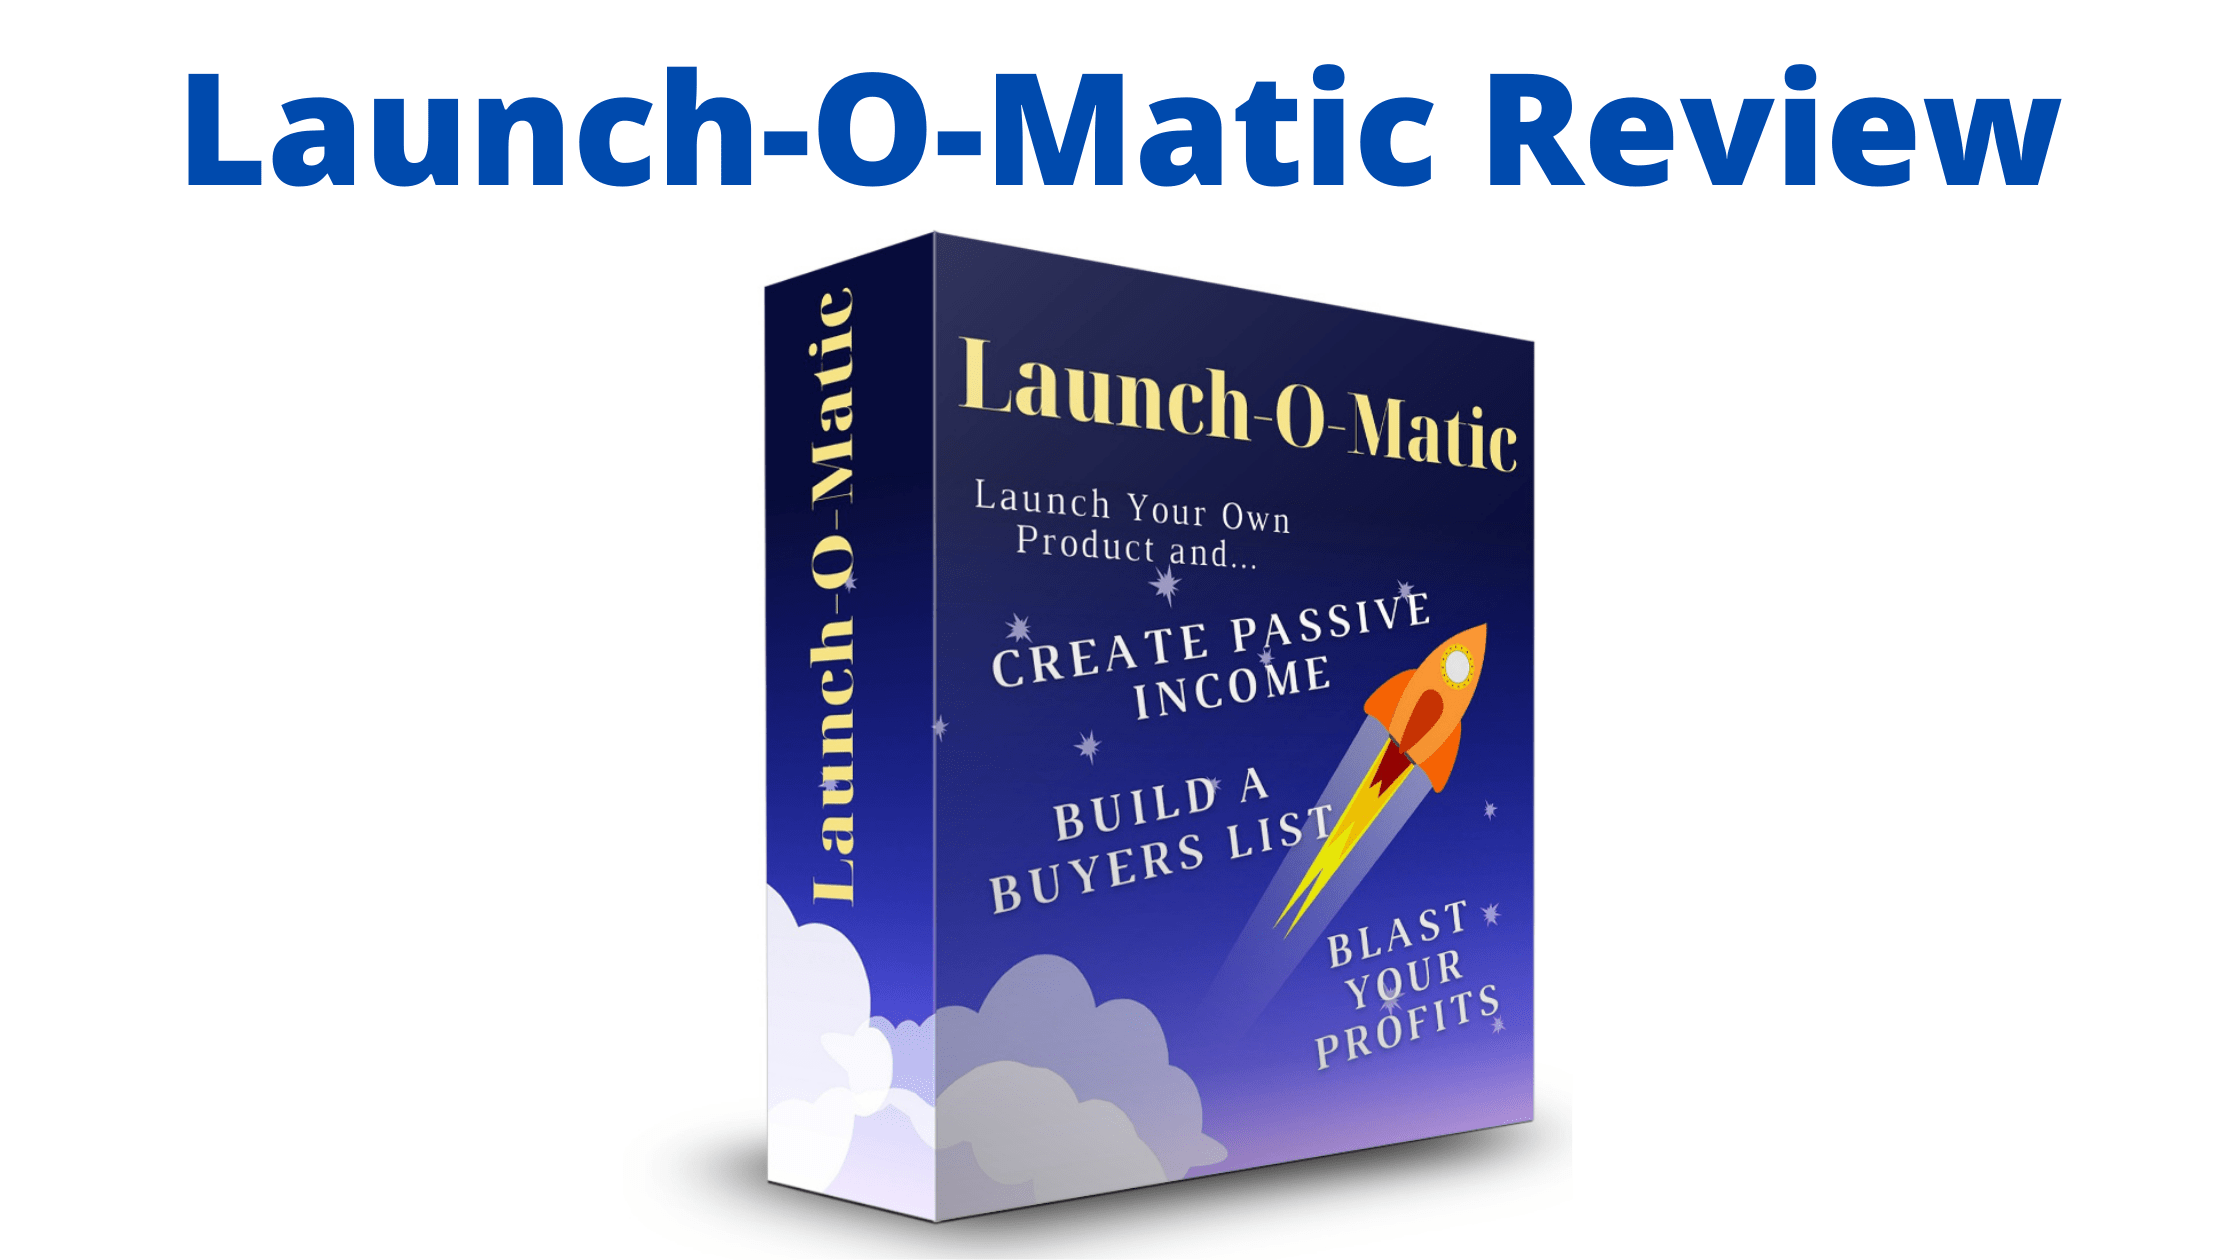 Launch-O-Matic Review